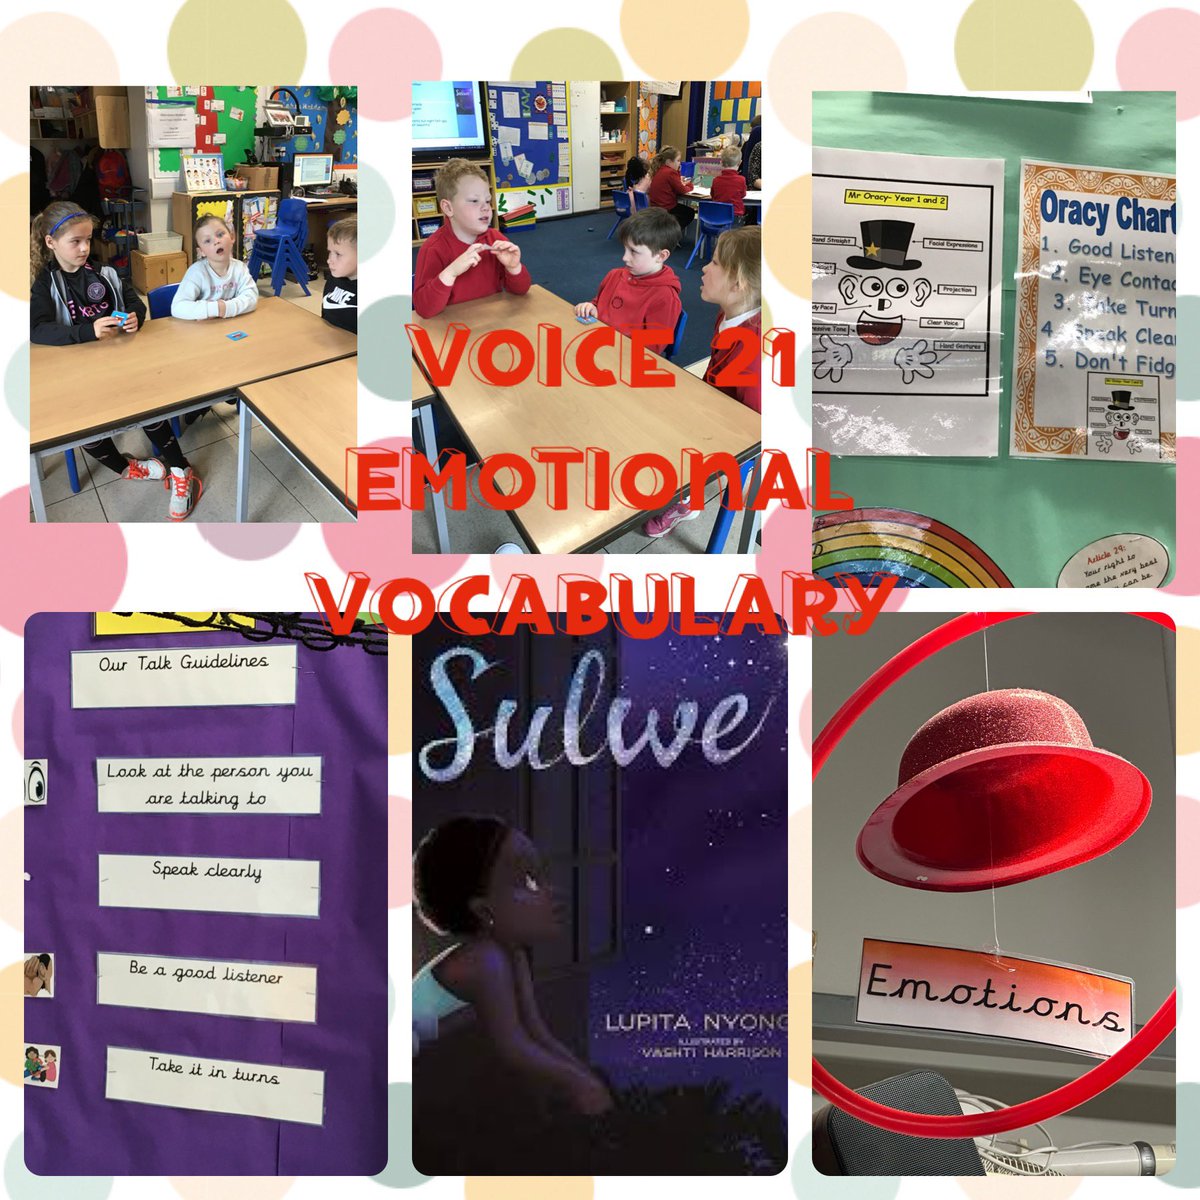 We empathised with Sulwe using our red hat thinking skills & put ourselves in her shoes. We used our Voice 21 oracy charters to work in trios, take turns, summarise and feedback. We listed emotional vocabulary to use in our story writing @voice21oracy @EmpathyLabUK @WG_Education